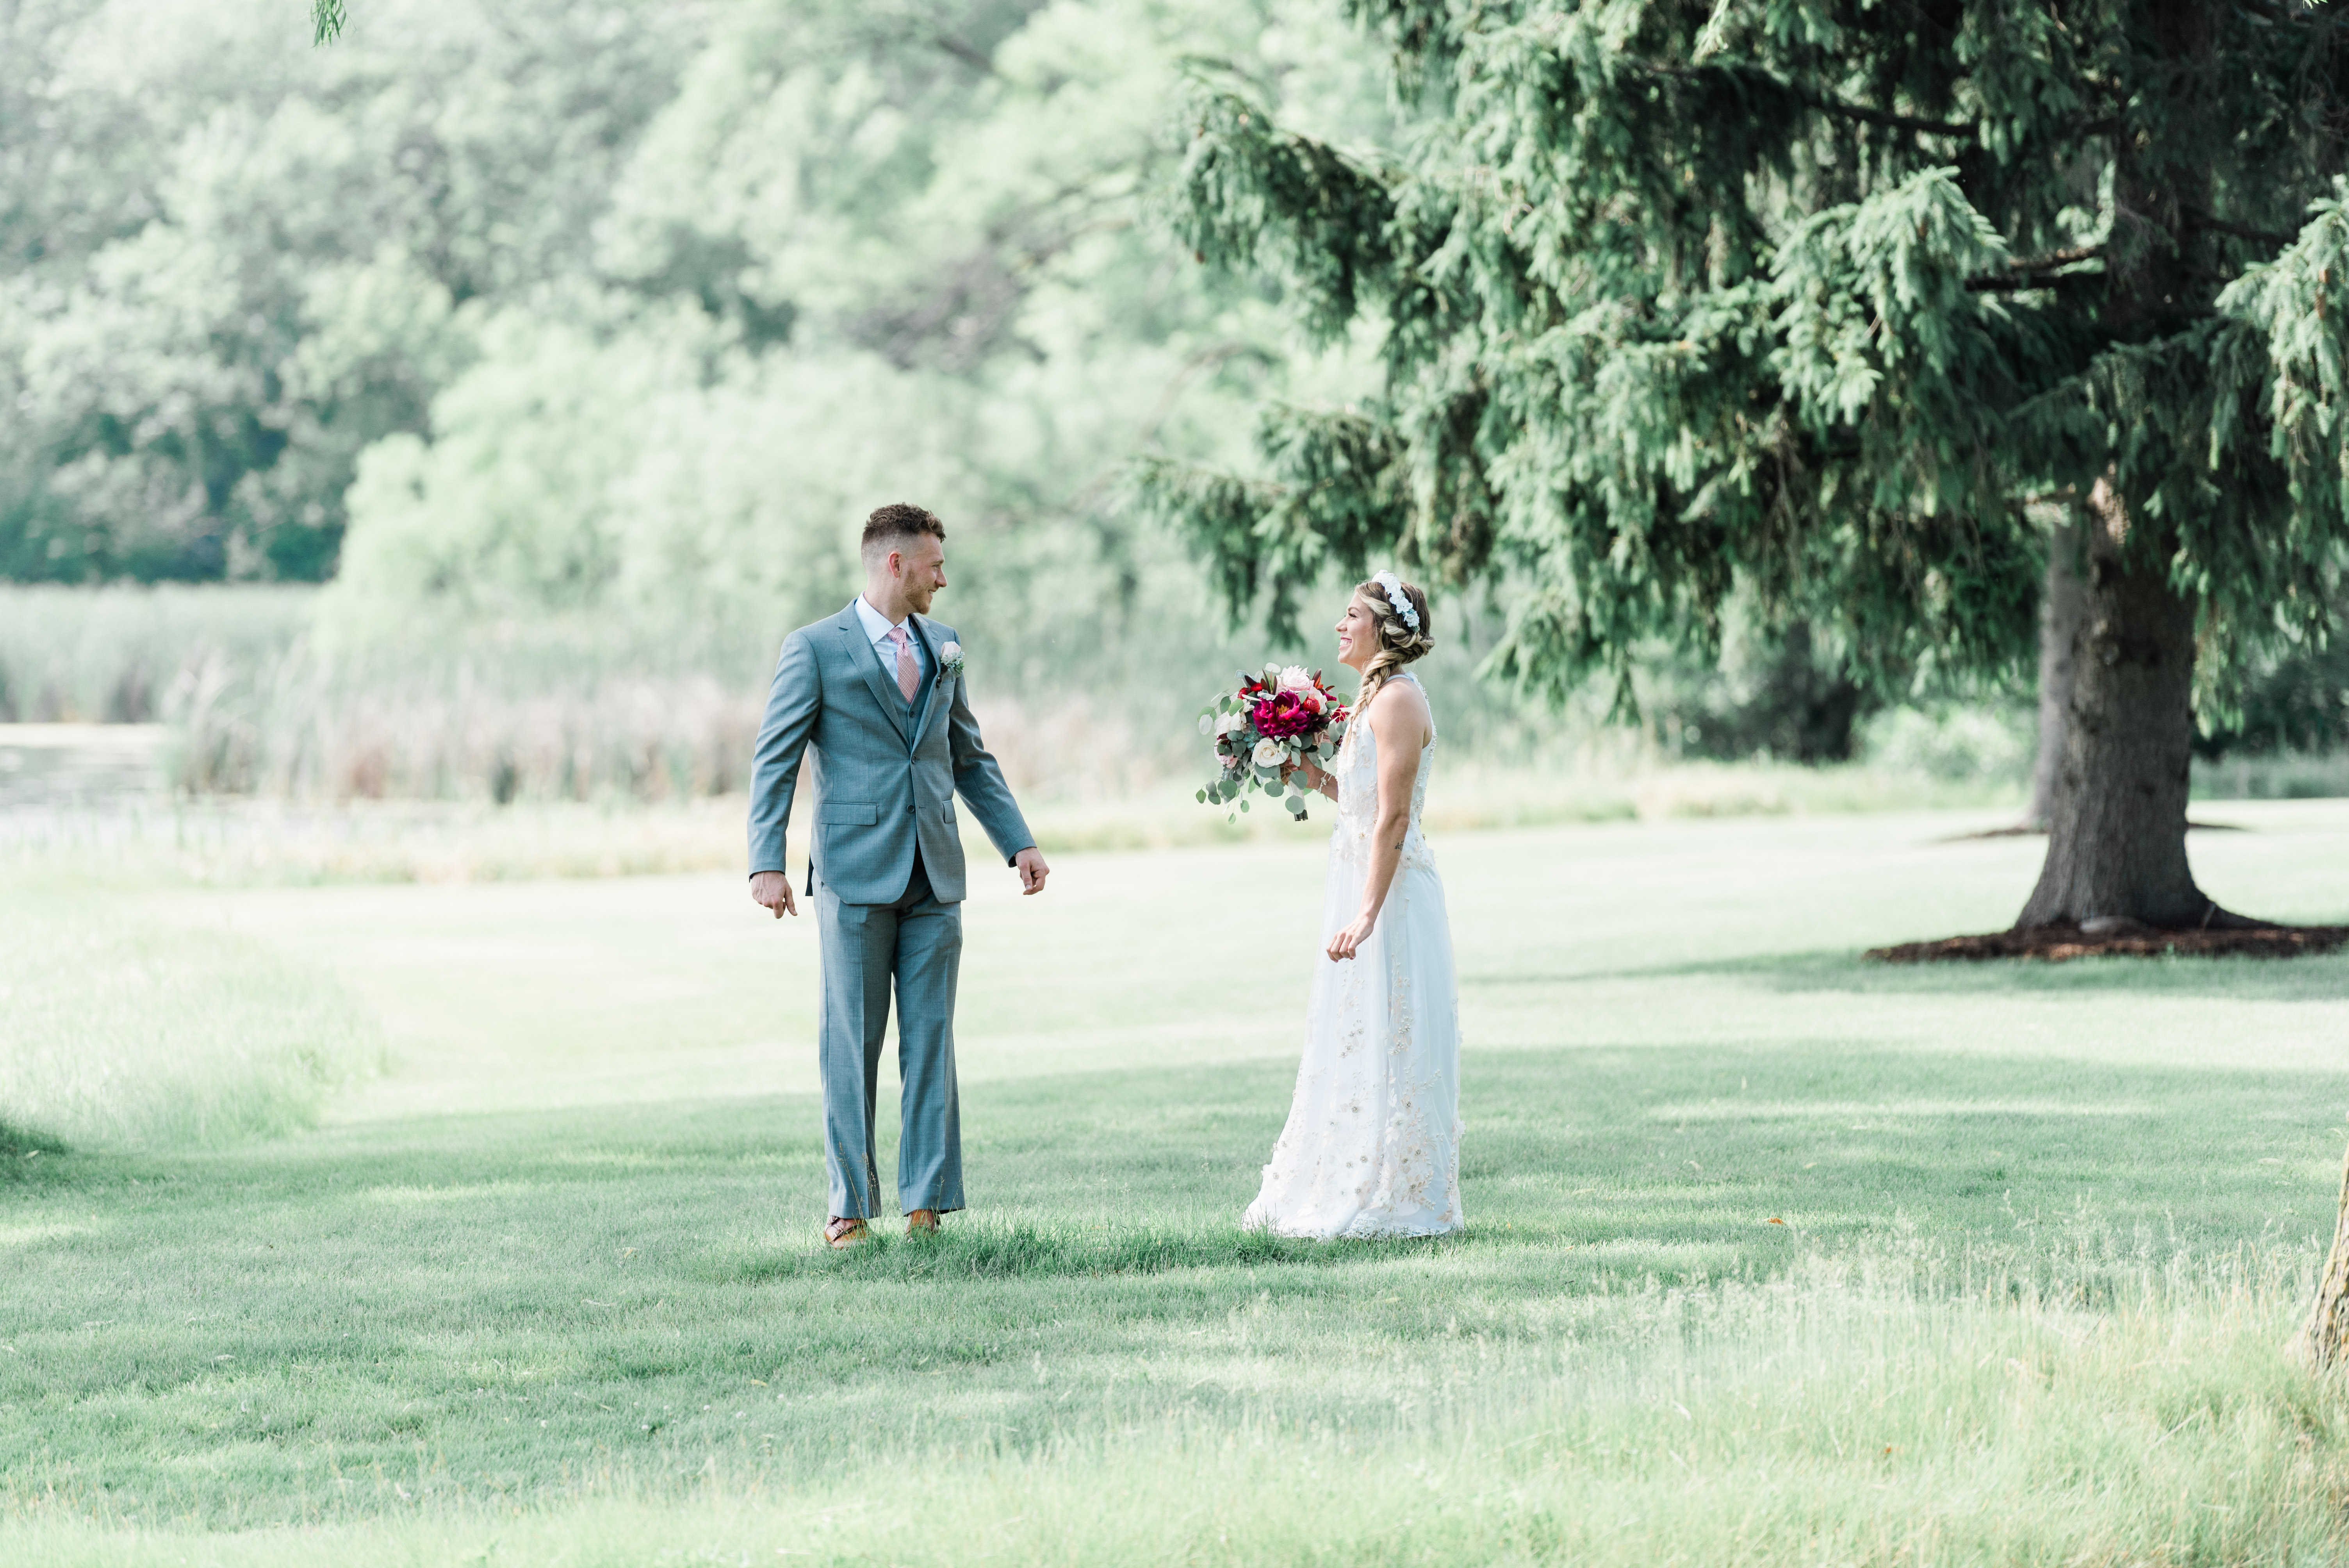 First look of bride and groom at Kemper Lakes Golf Club